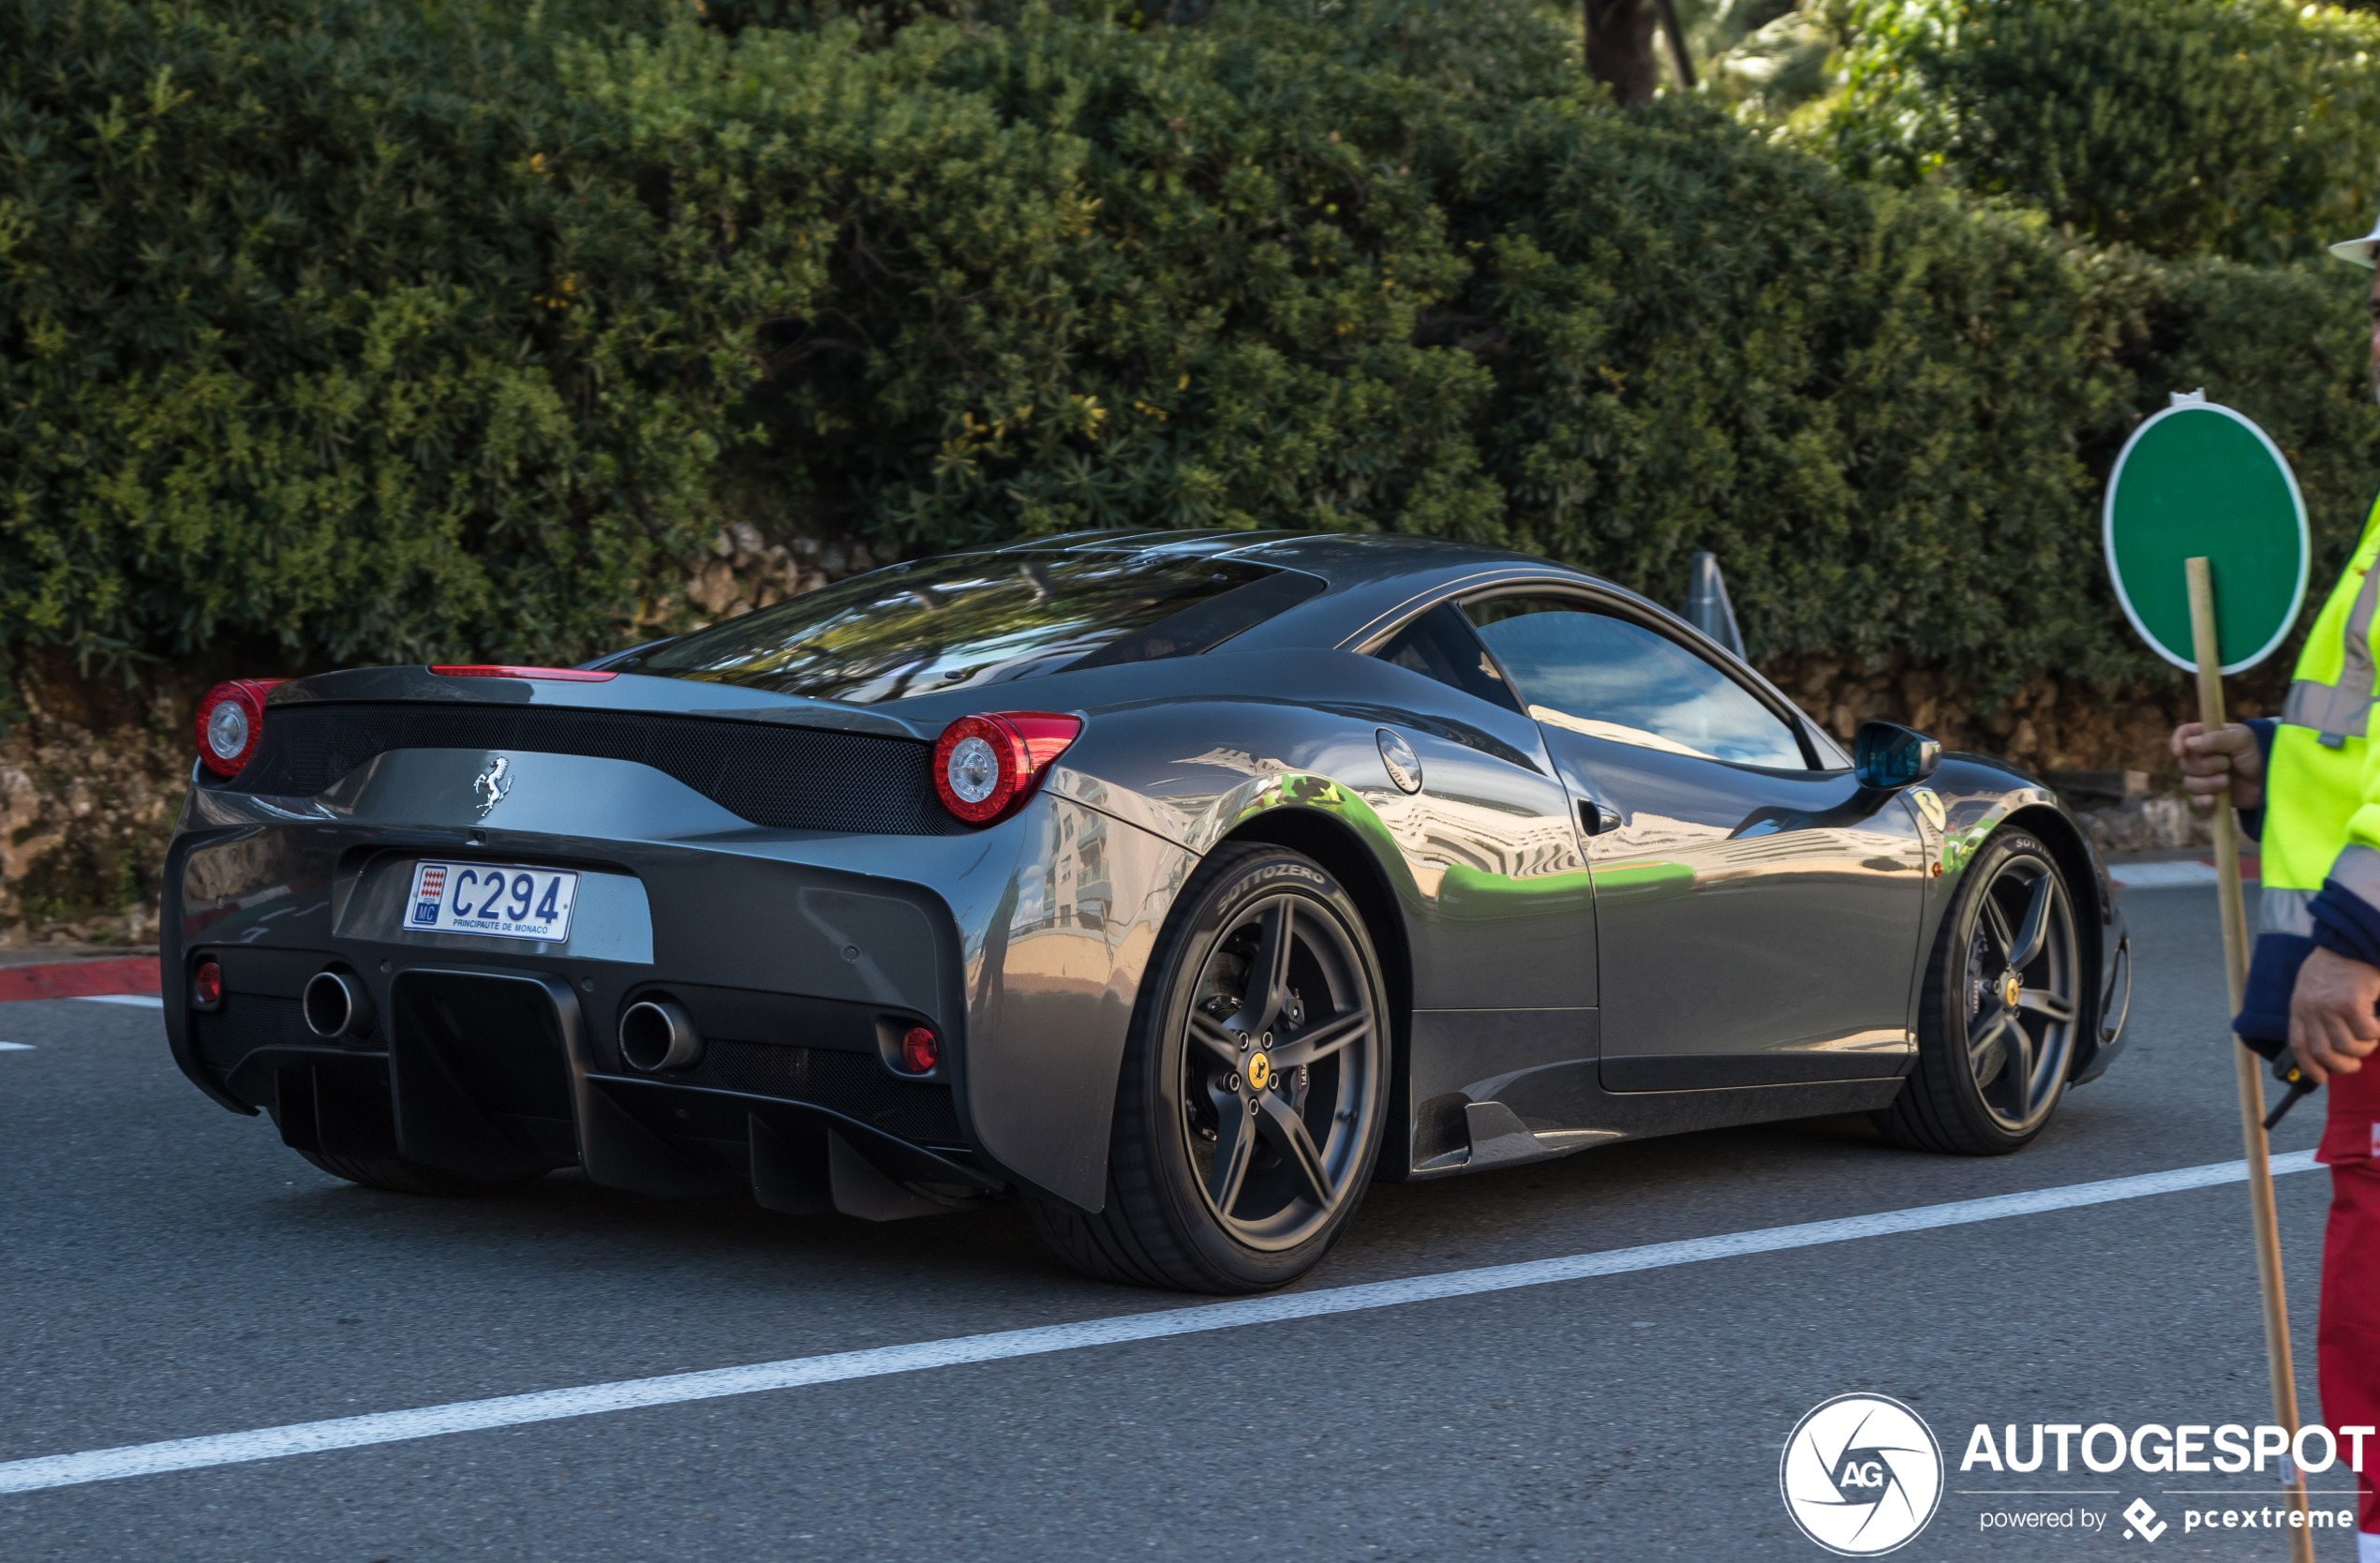 New 458 Speciales keep appearing on the site